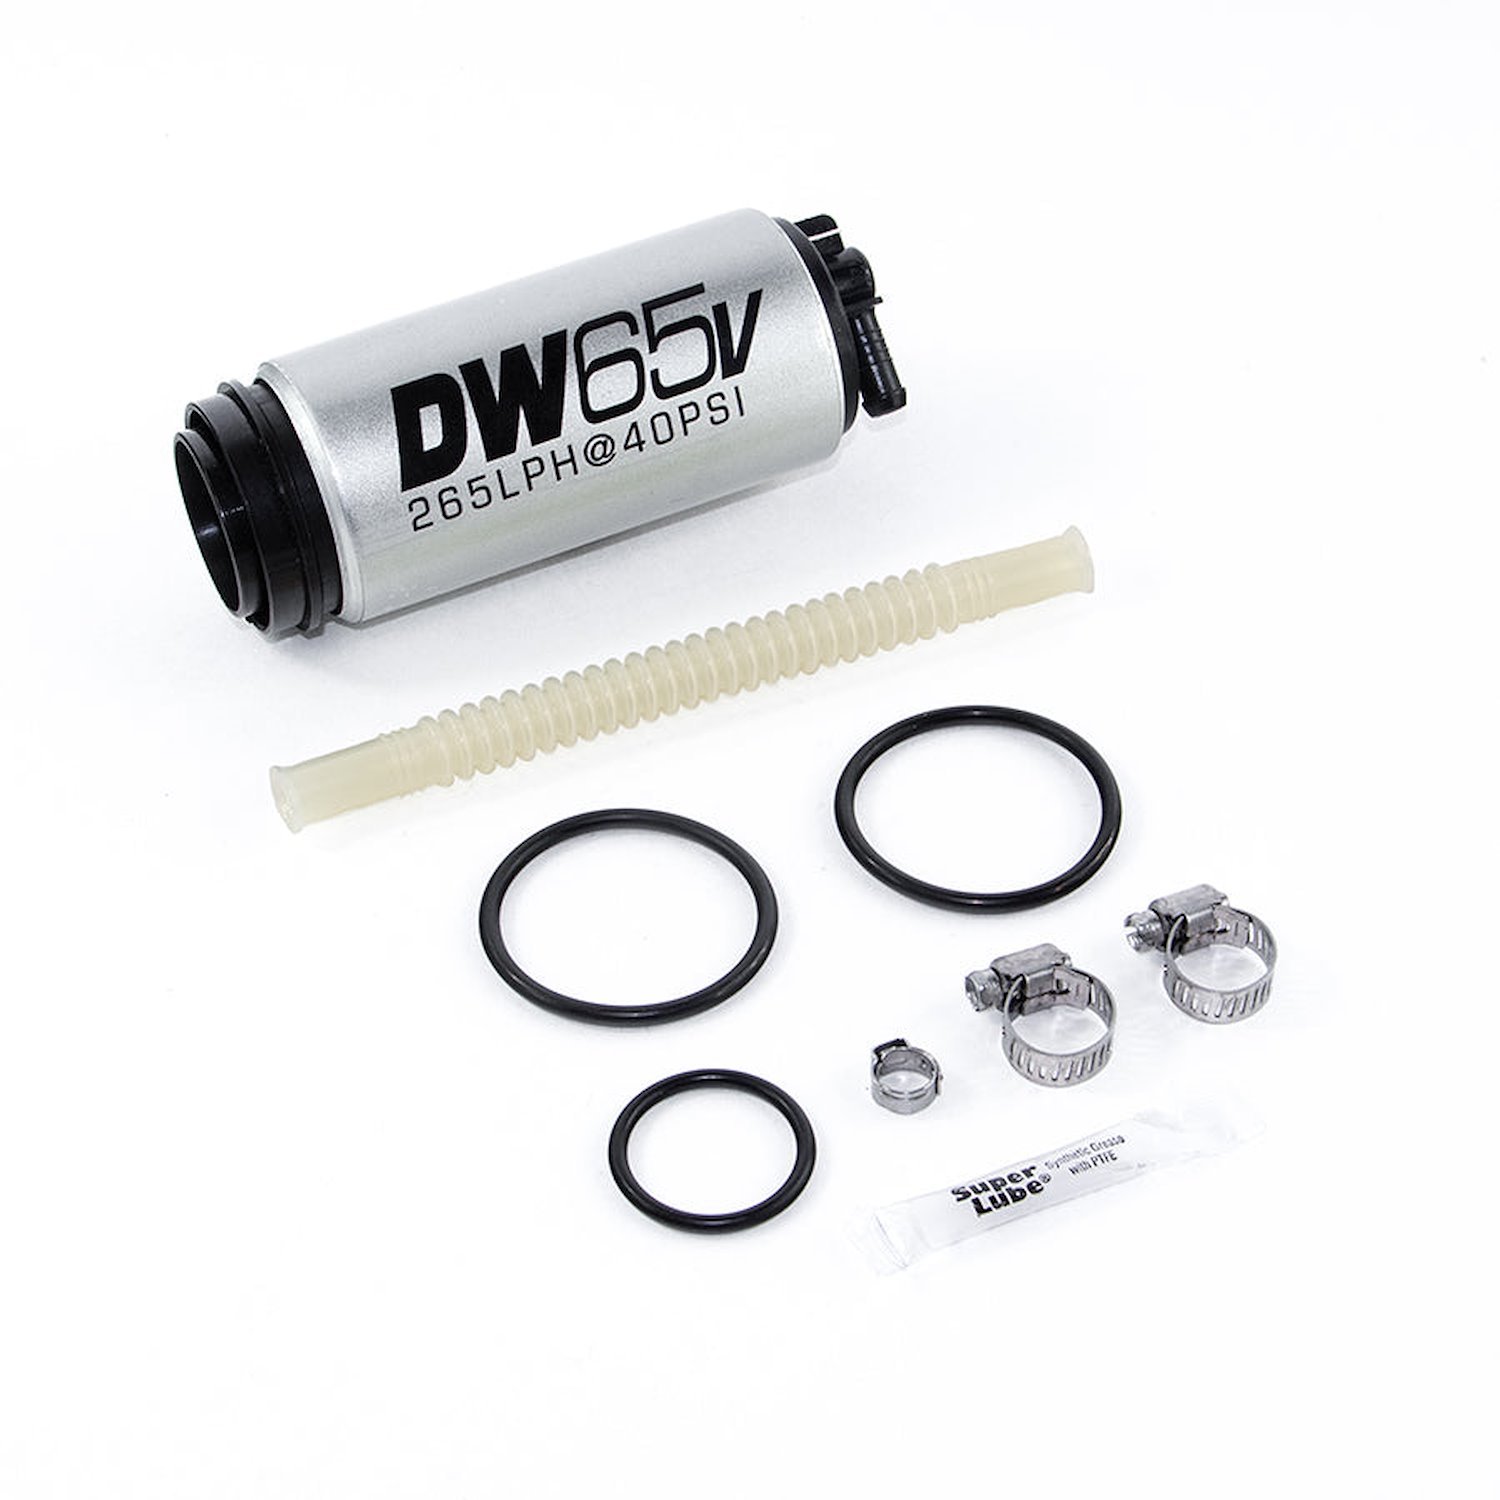 96551025 DW65v series 265lph in-tank fuel pump w/ install kit for VW and Audi 1.8t 3.2 AWD